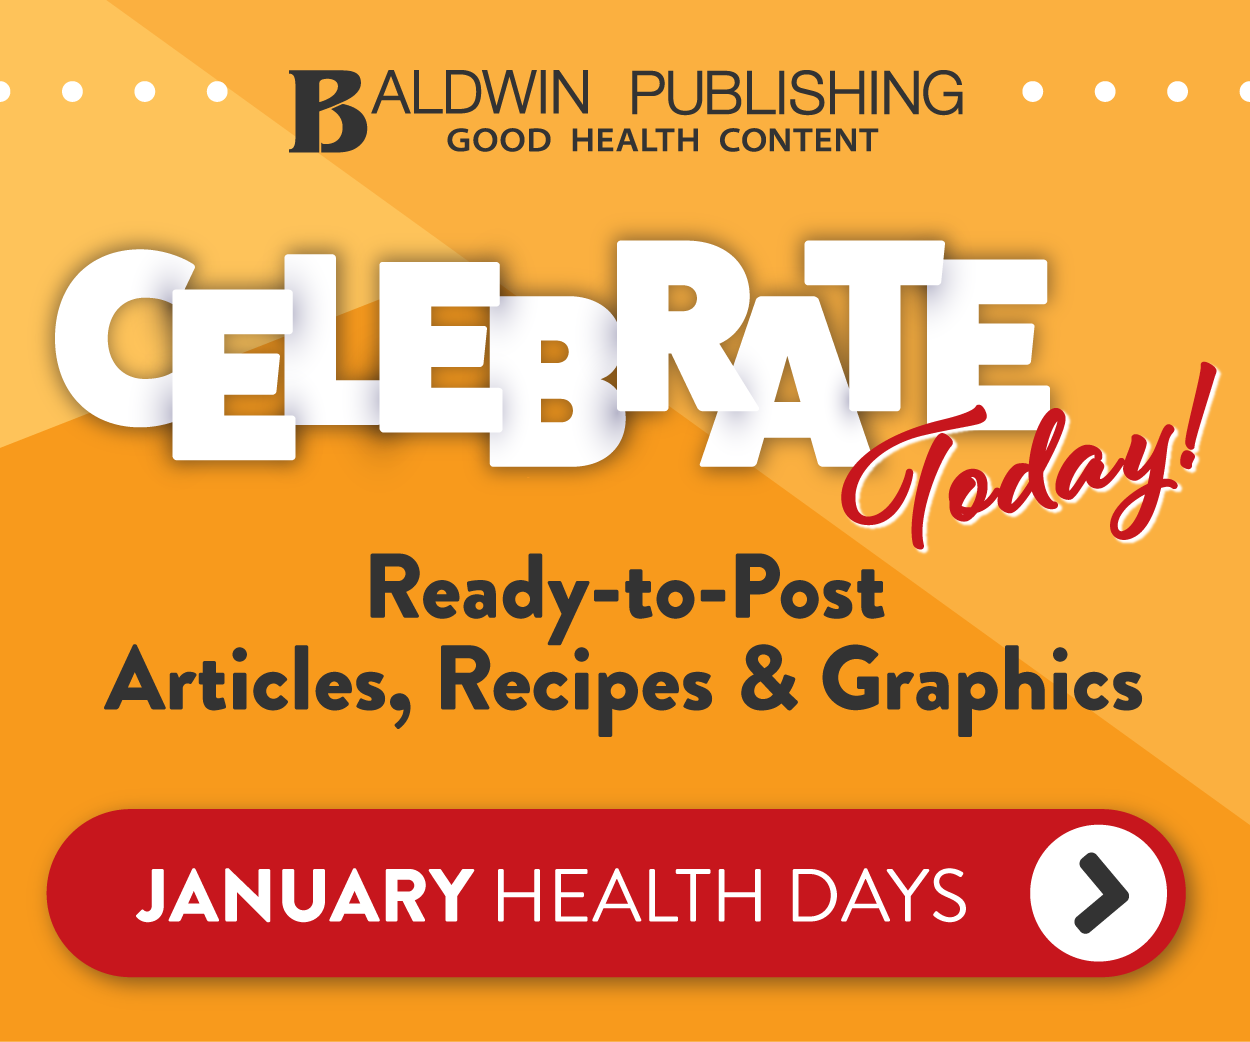 Baldwin Publishing - Celebrate Today, See All January Health Days